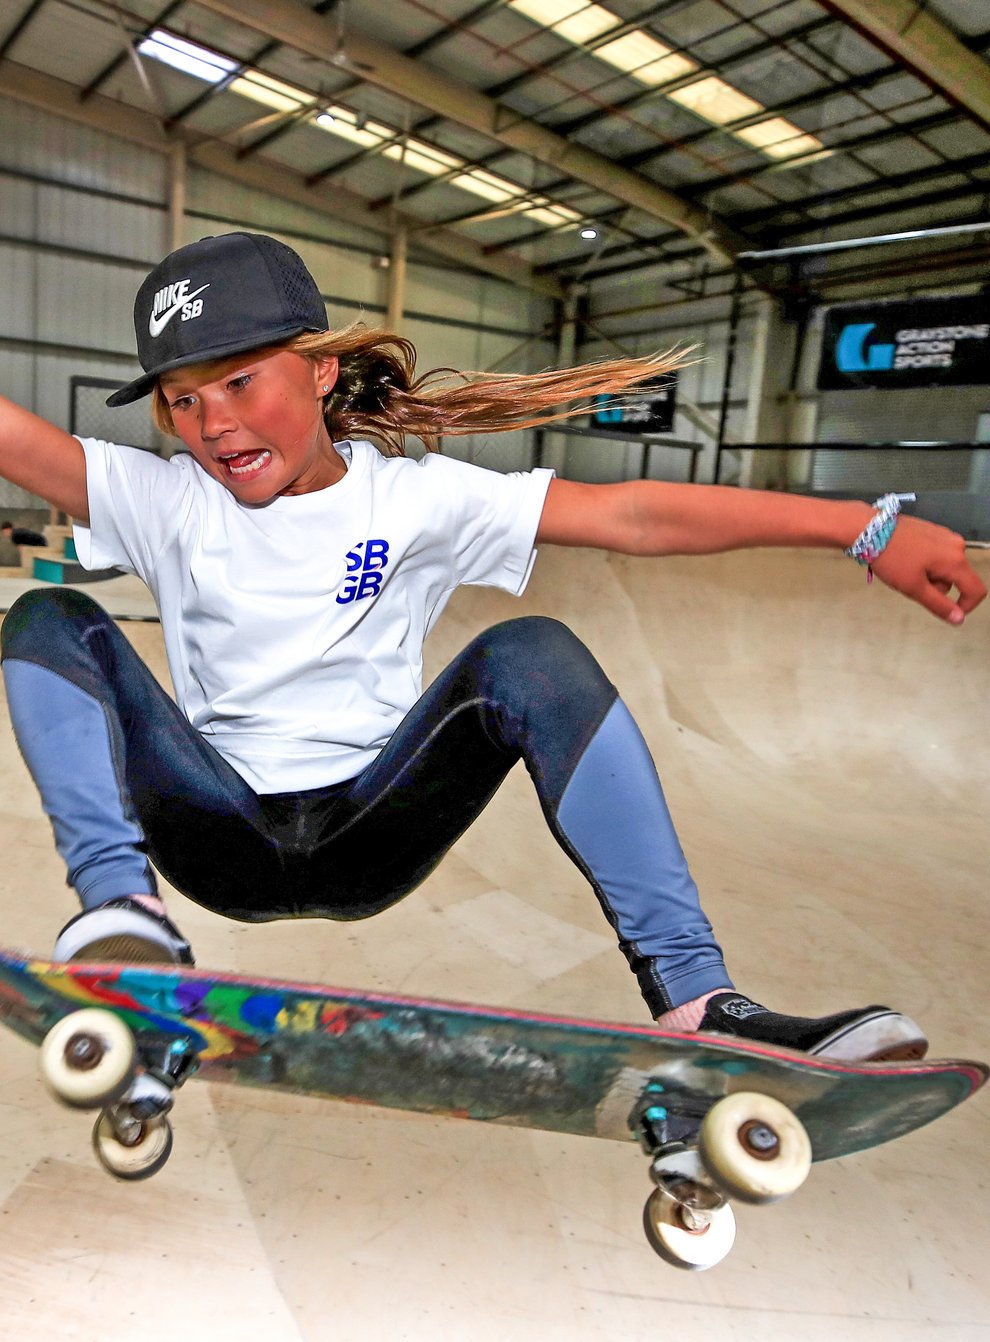 Skateboarder Sky Brown has suffered a fractured skull in a training crash